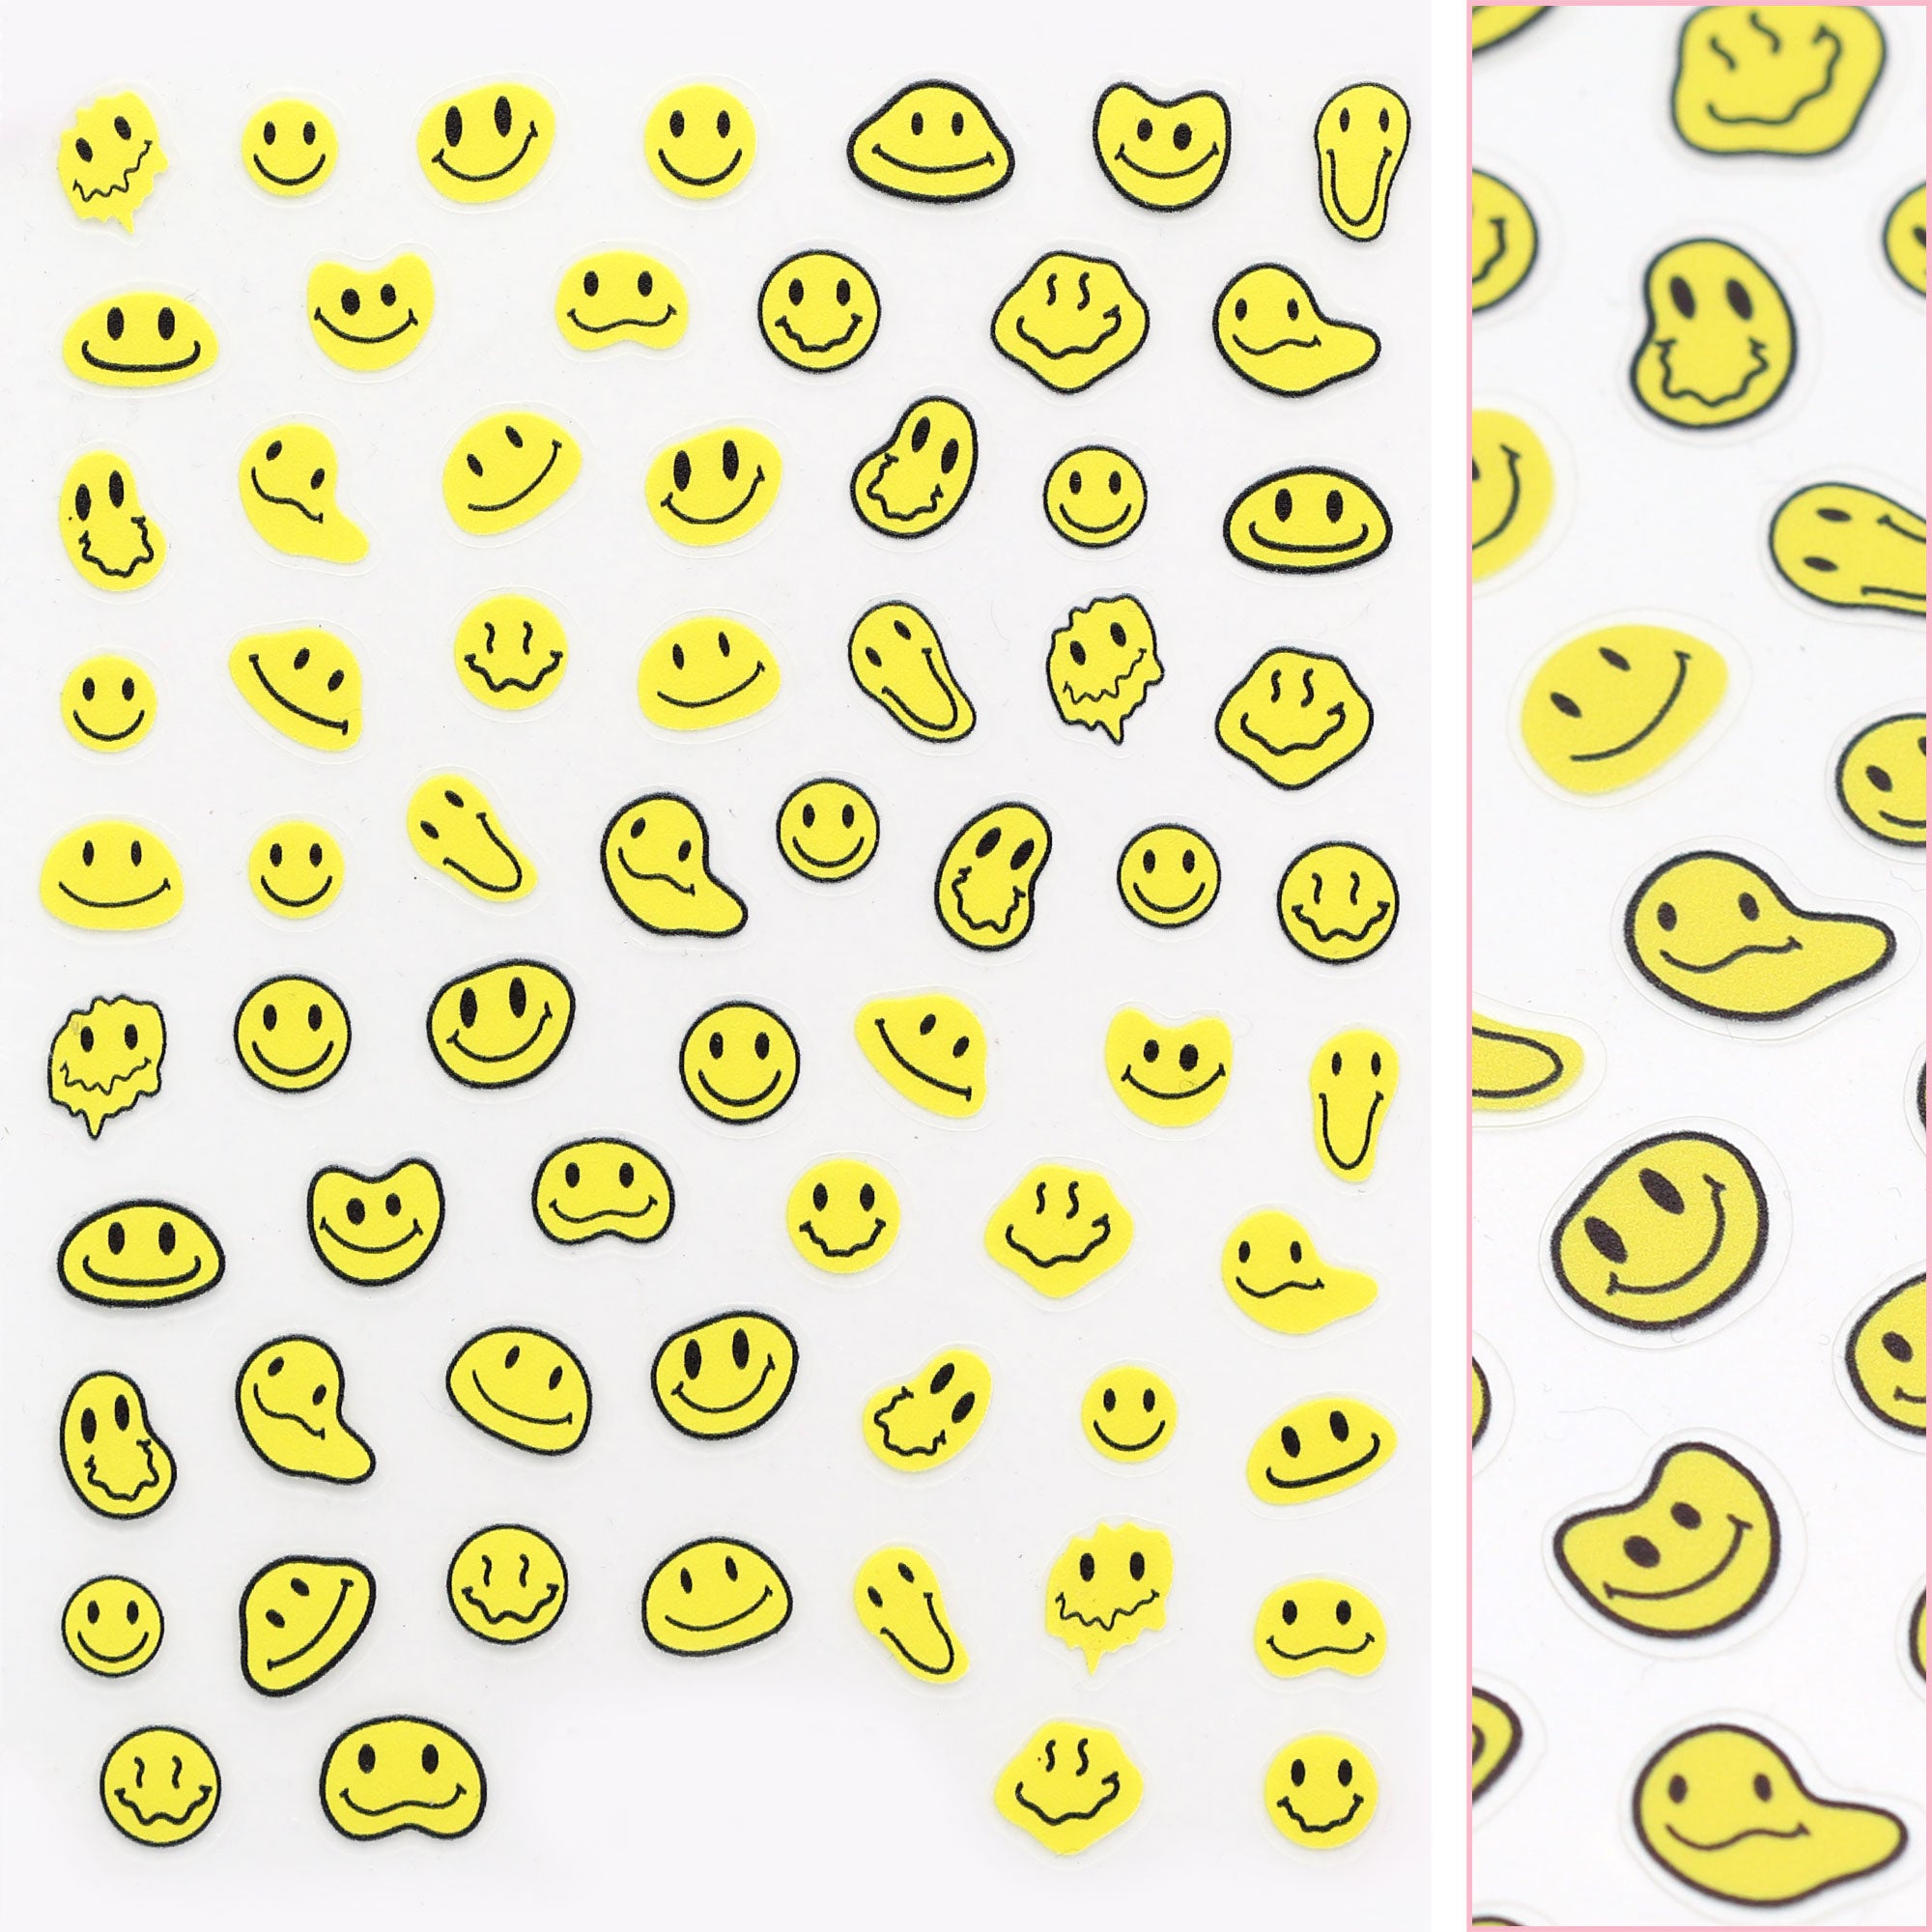 Melting Smiley Face Vector Art Icons and Graphics for Free Download